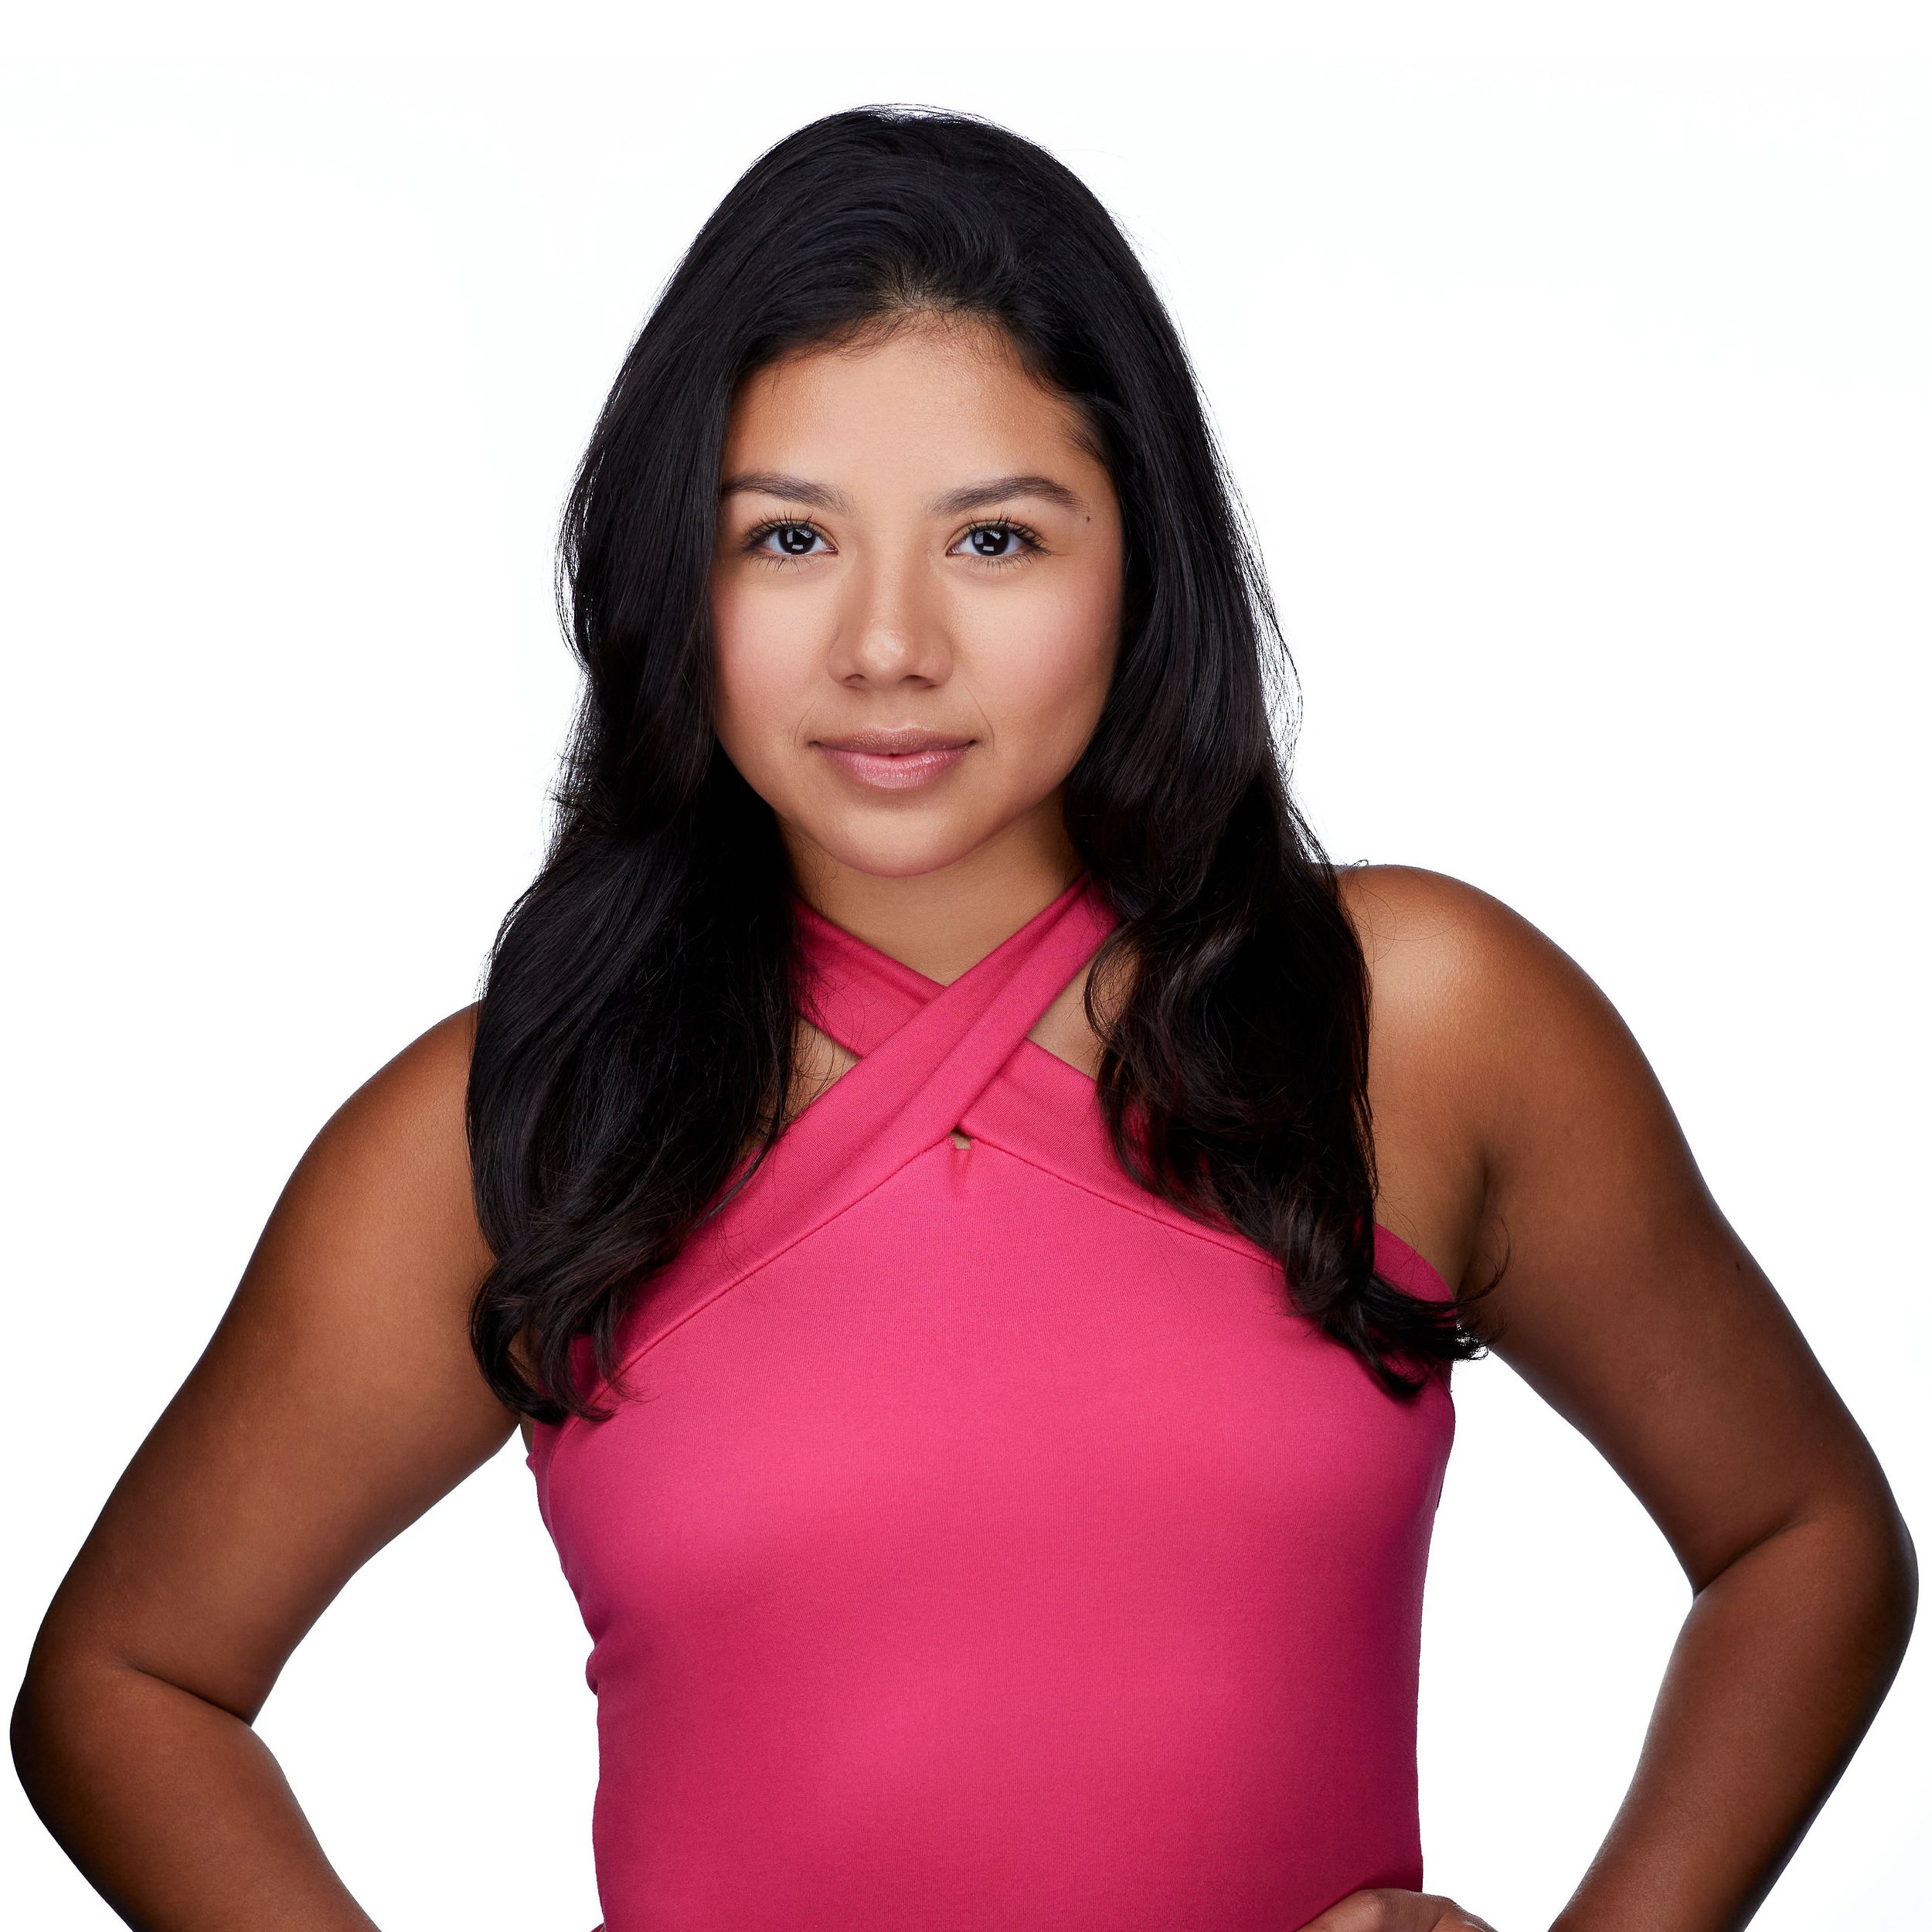 A woman in a pink shirt with long dark hair on a white background.